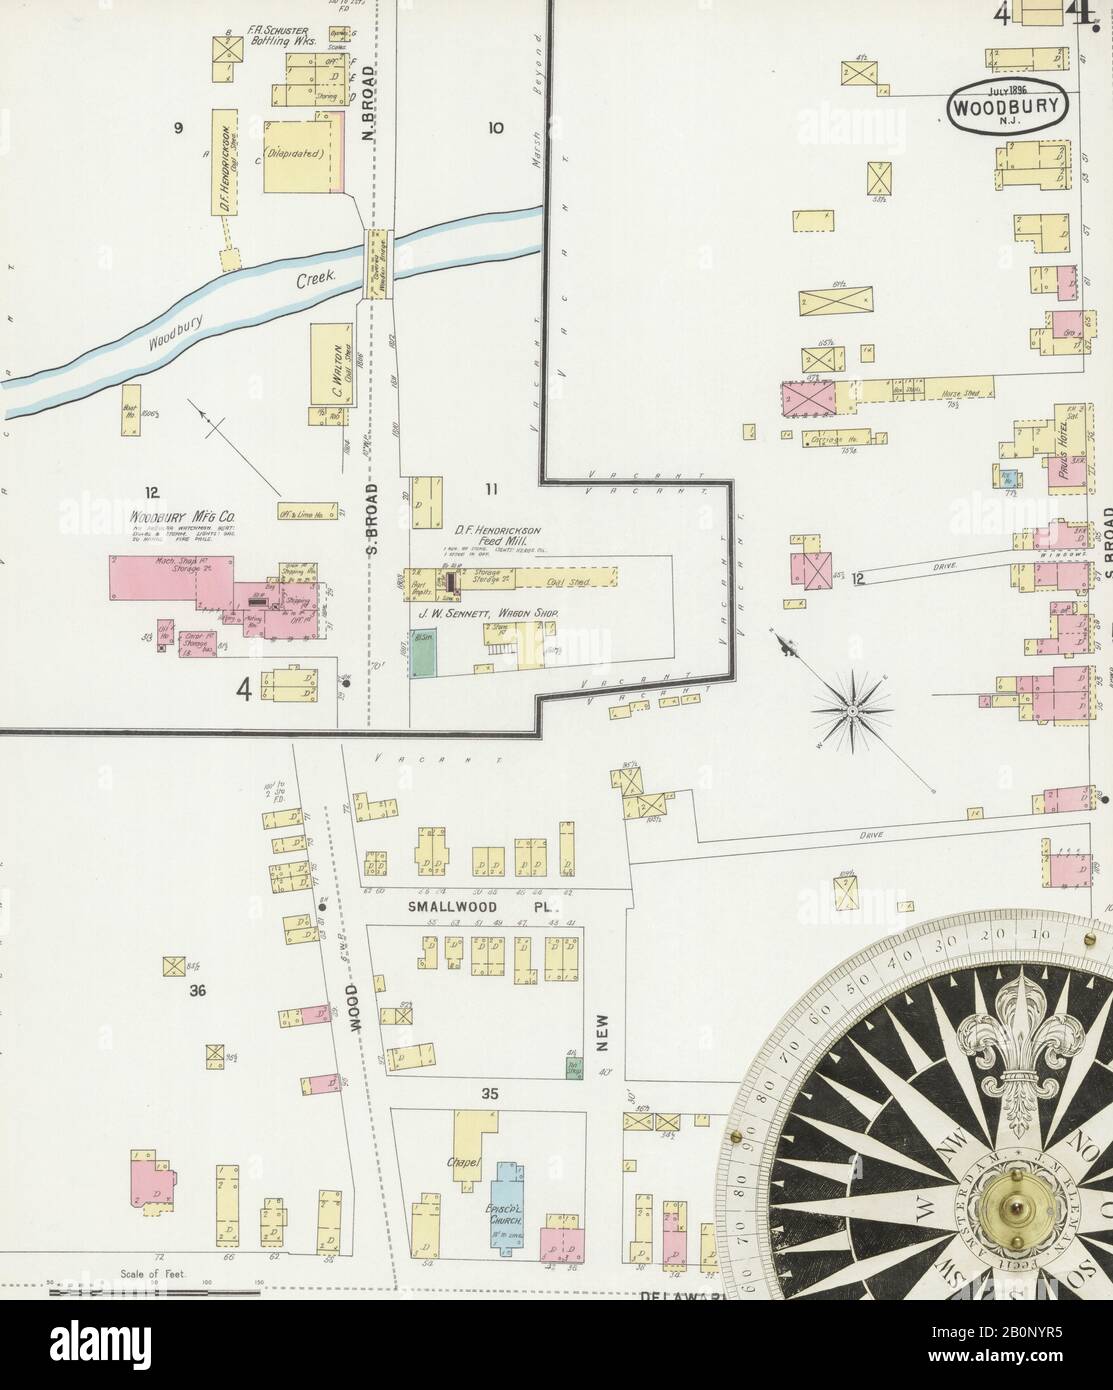 Image 4 of Sanborn Fire Insurance Map from Woodbury, Gloucester County, New Jersey. Jul 1896. 8 Sheet(s), America, street map with a Nineteenth Century compass Stock Photo